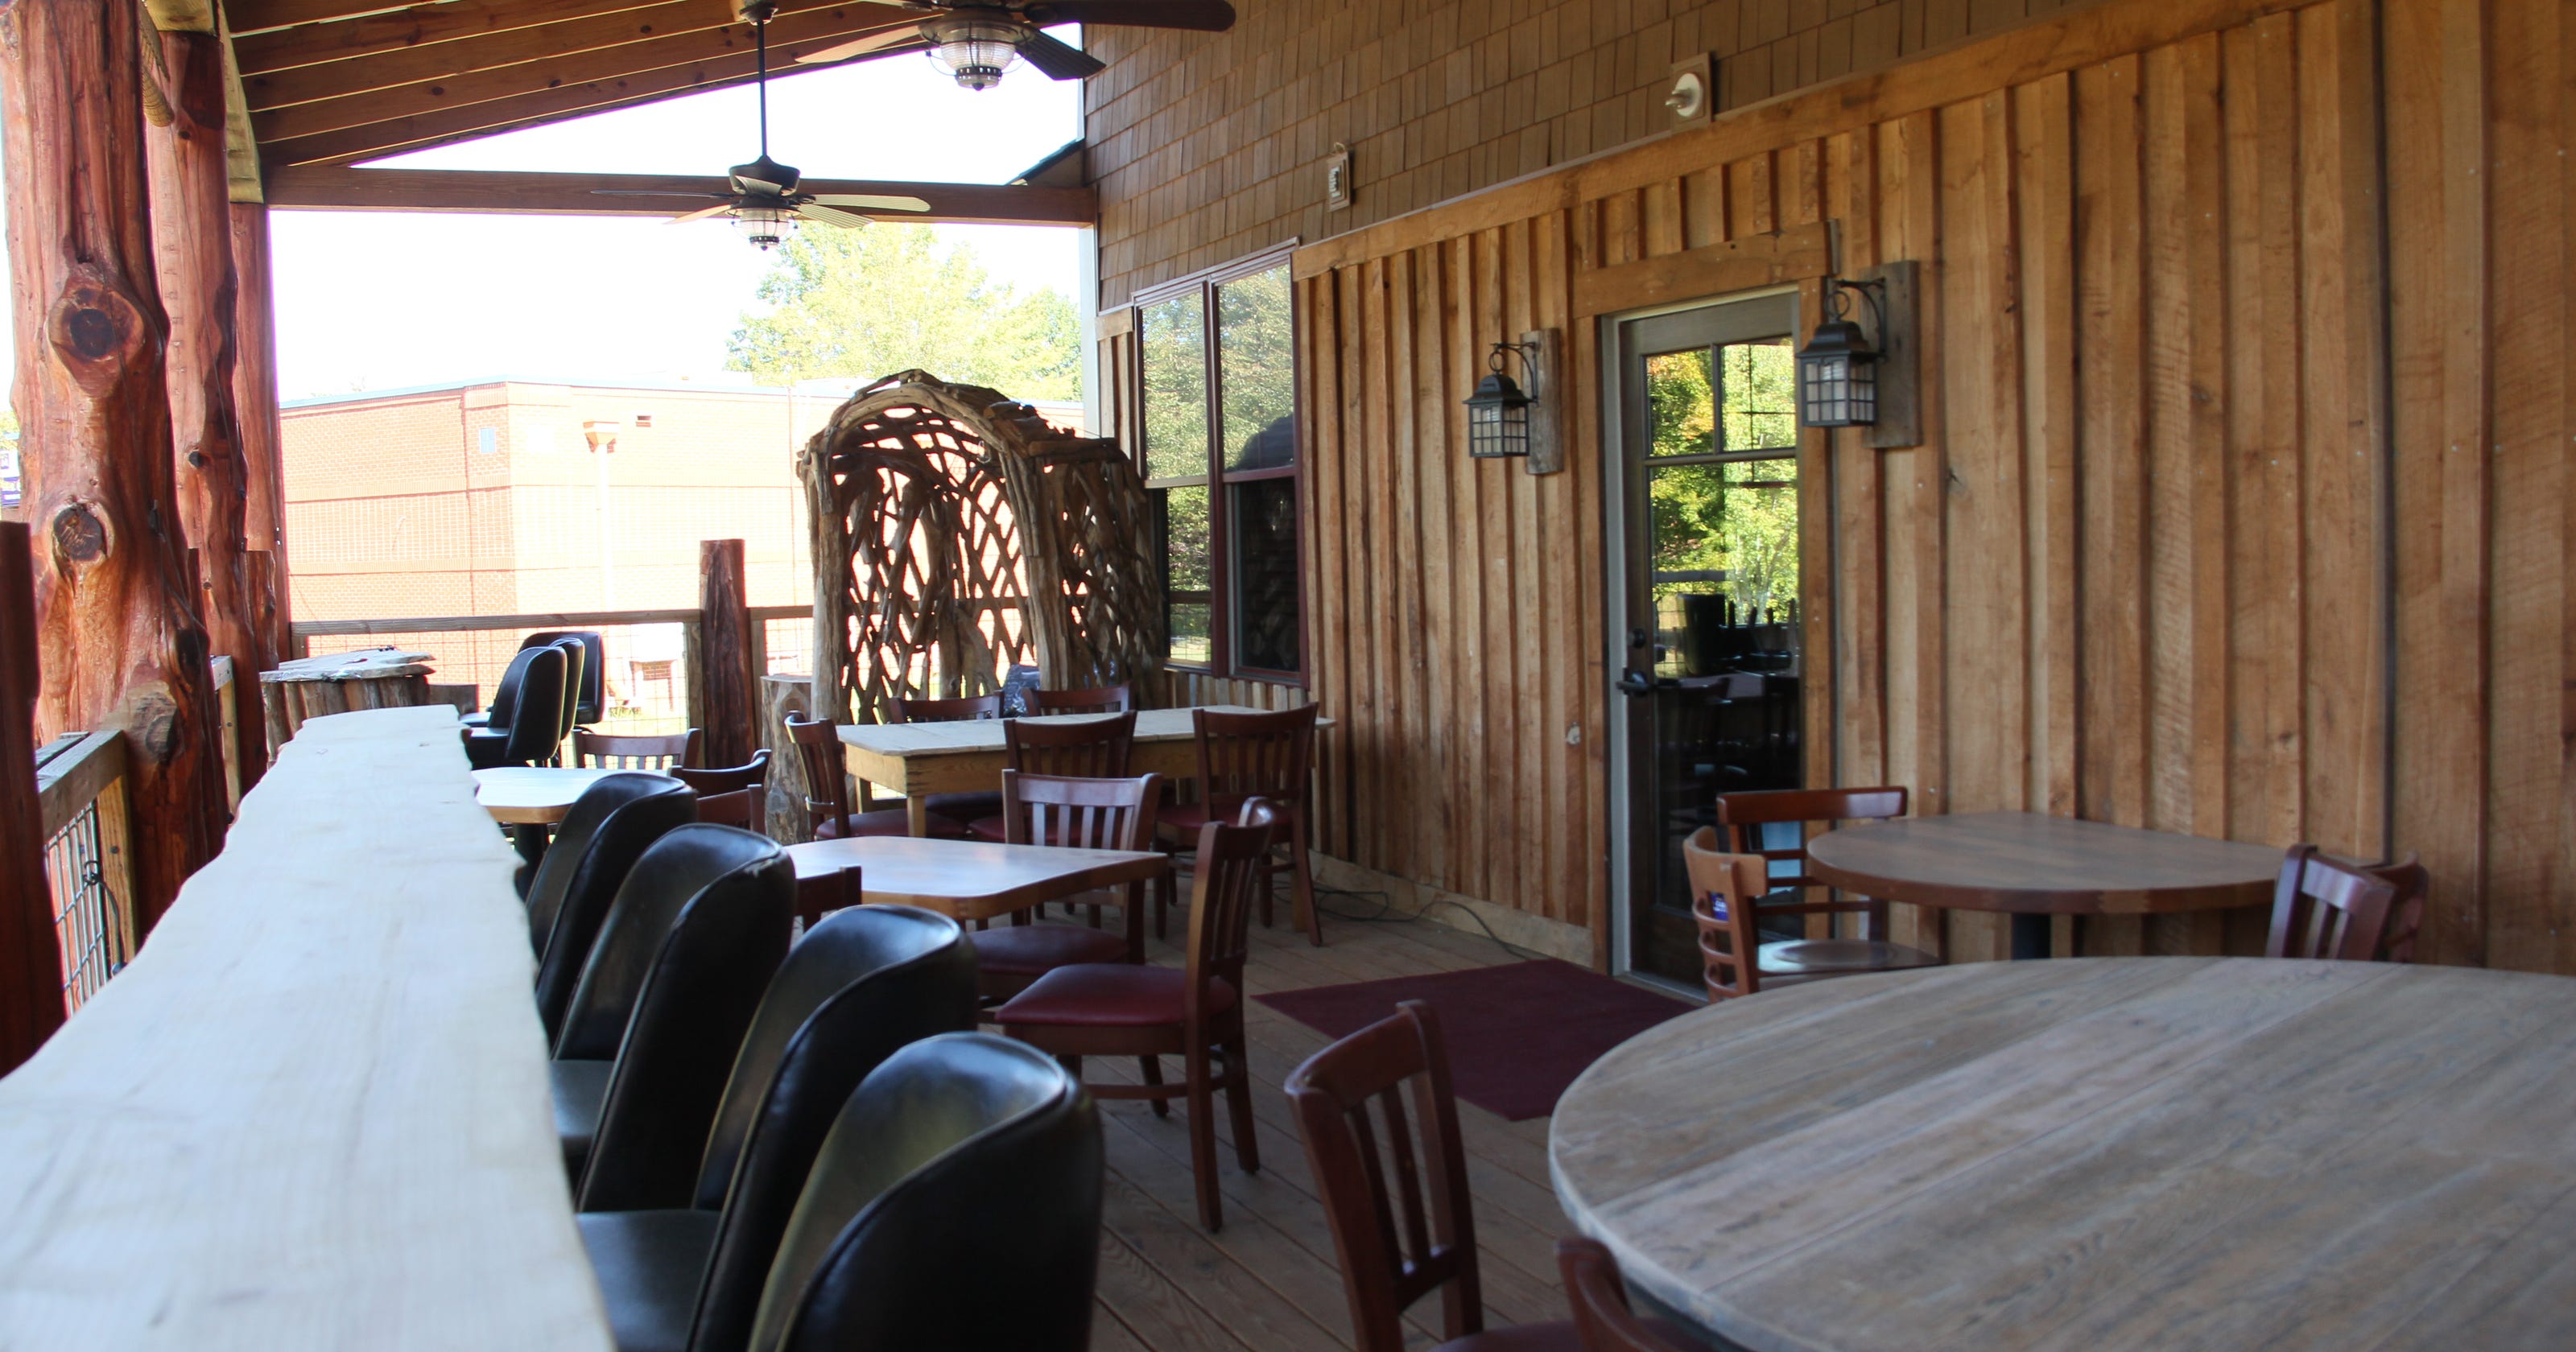 5 restaurants in the Upstate with great outdoor seating